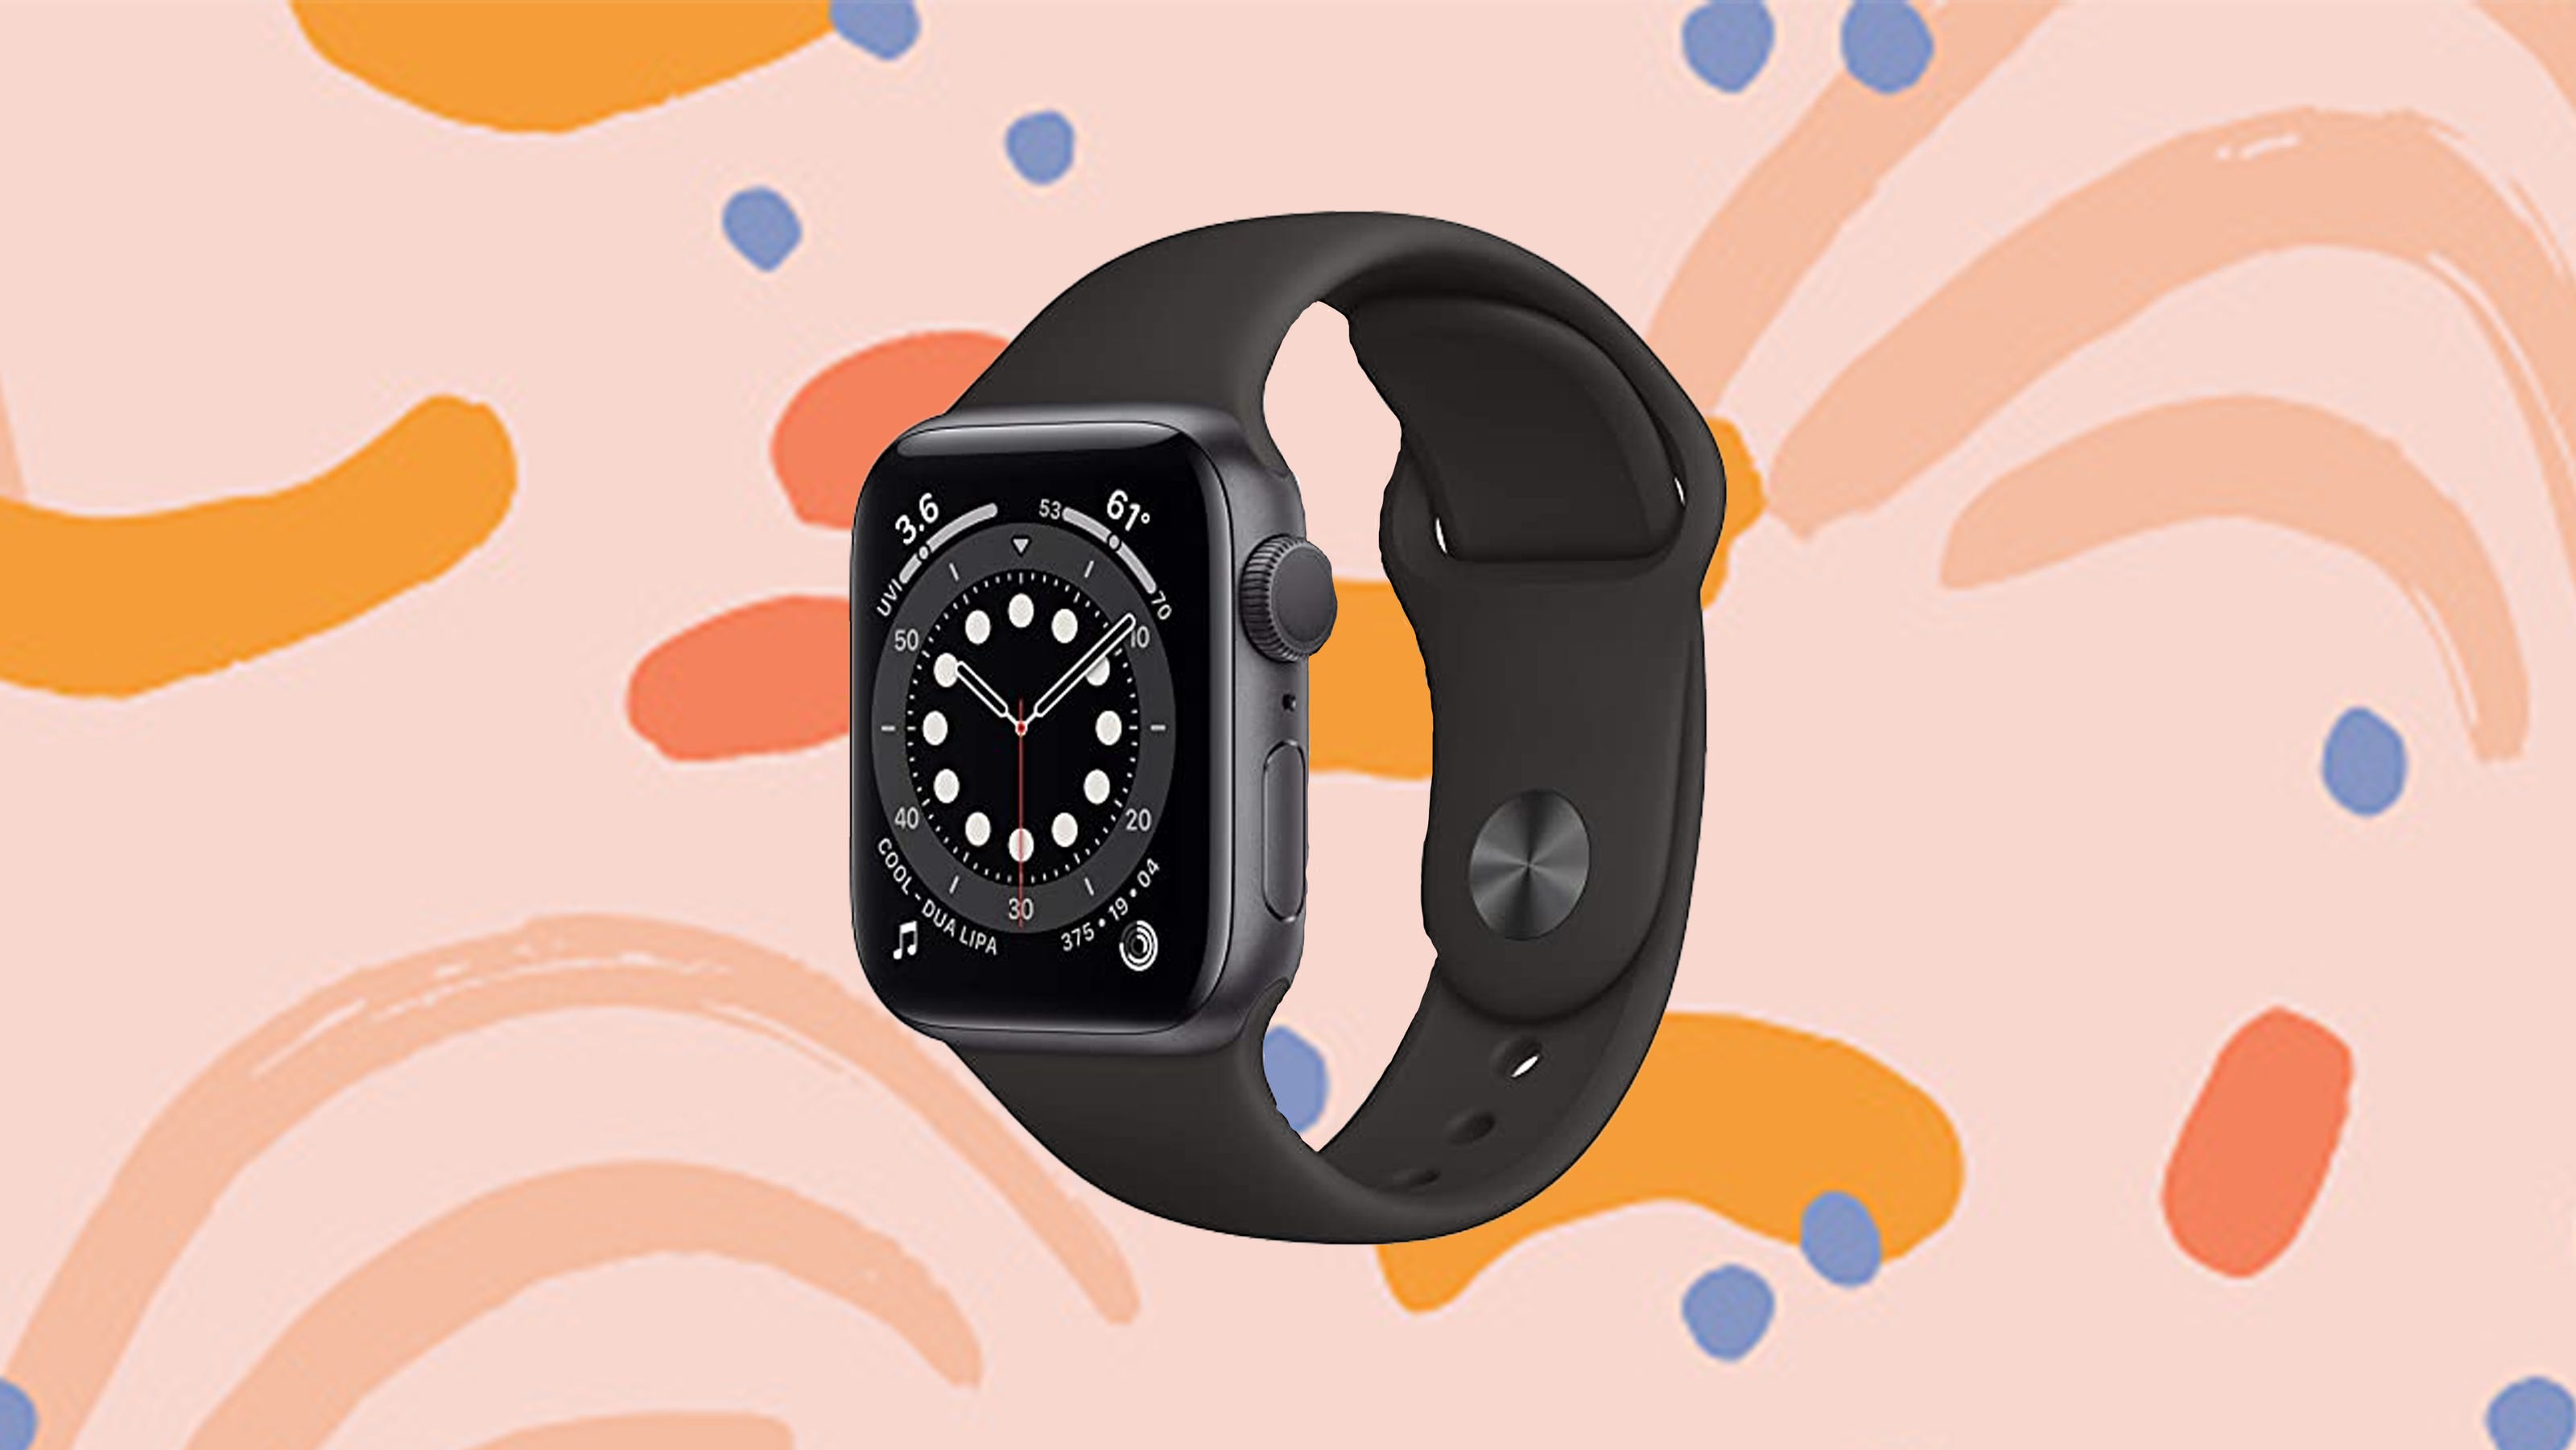 Apple Watch Series 6 Get Apples Latest And Greatest Smartwatch On Sale 9016